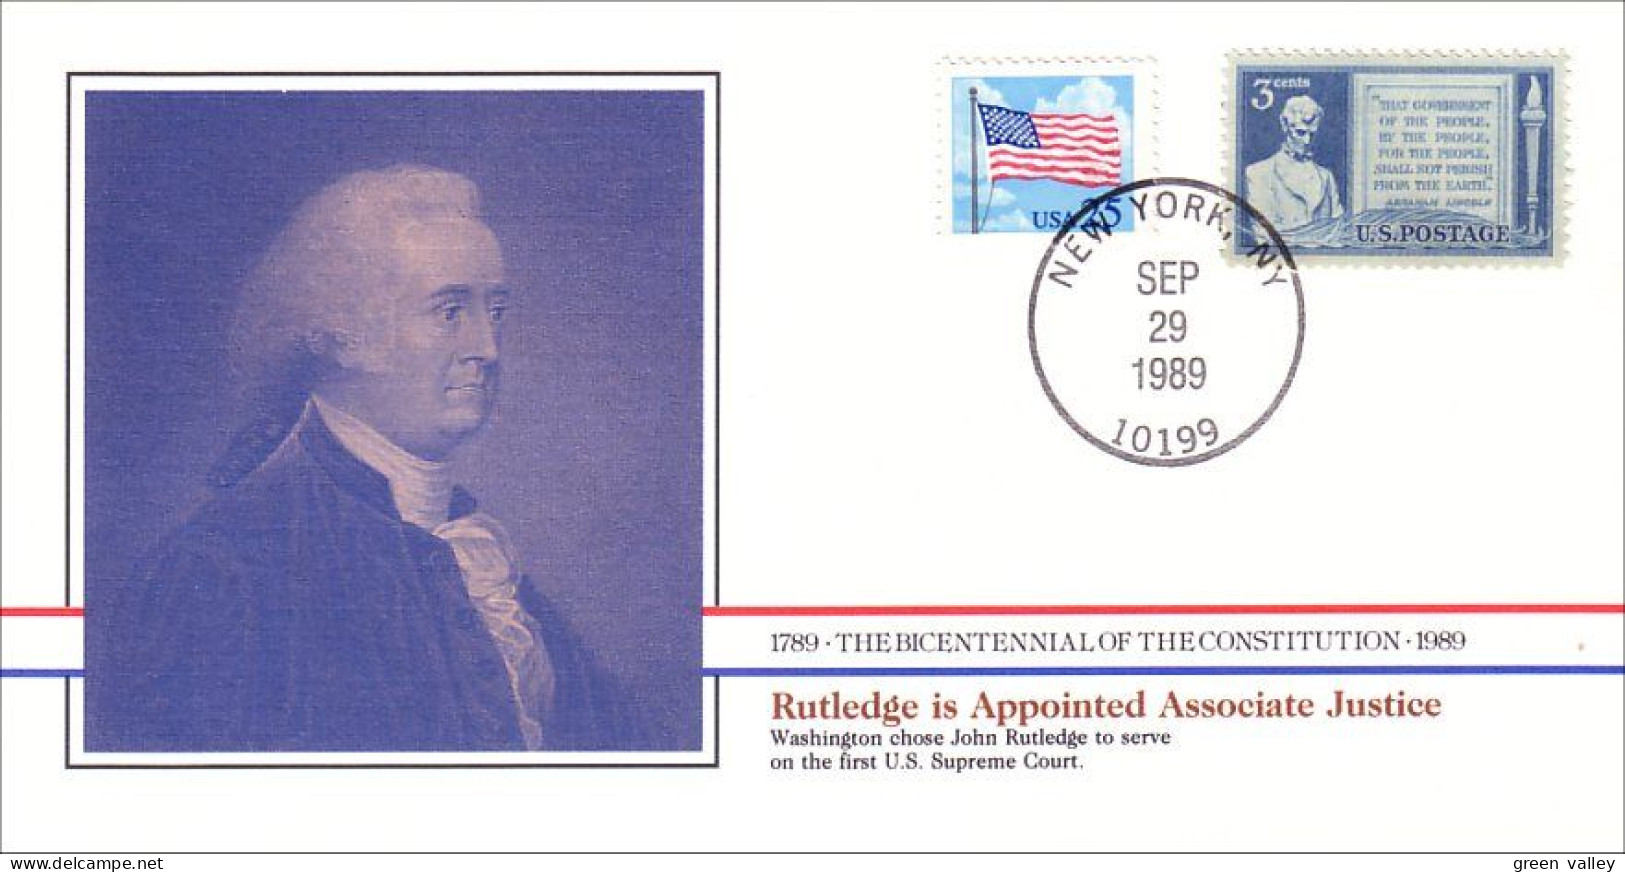 American Constitution Rutledge Appointed Associate Justice Sep 29 1789 Cover ( A82 98) - Unabhängigkeit USA